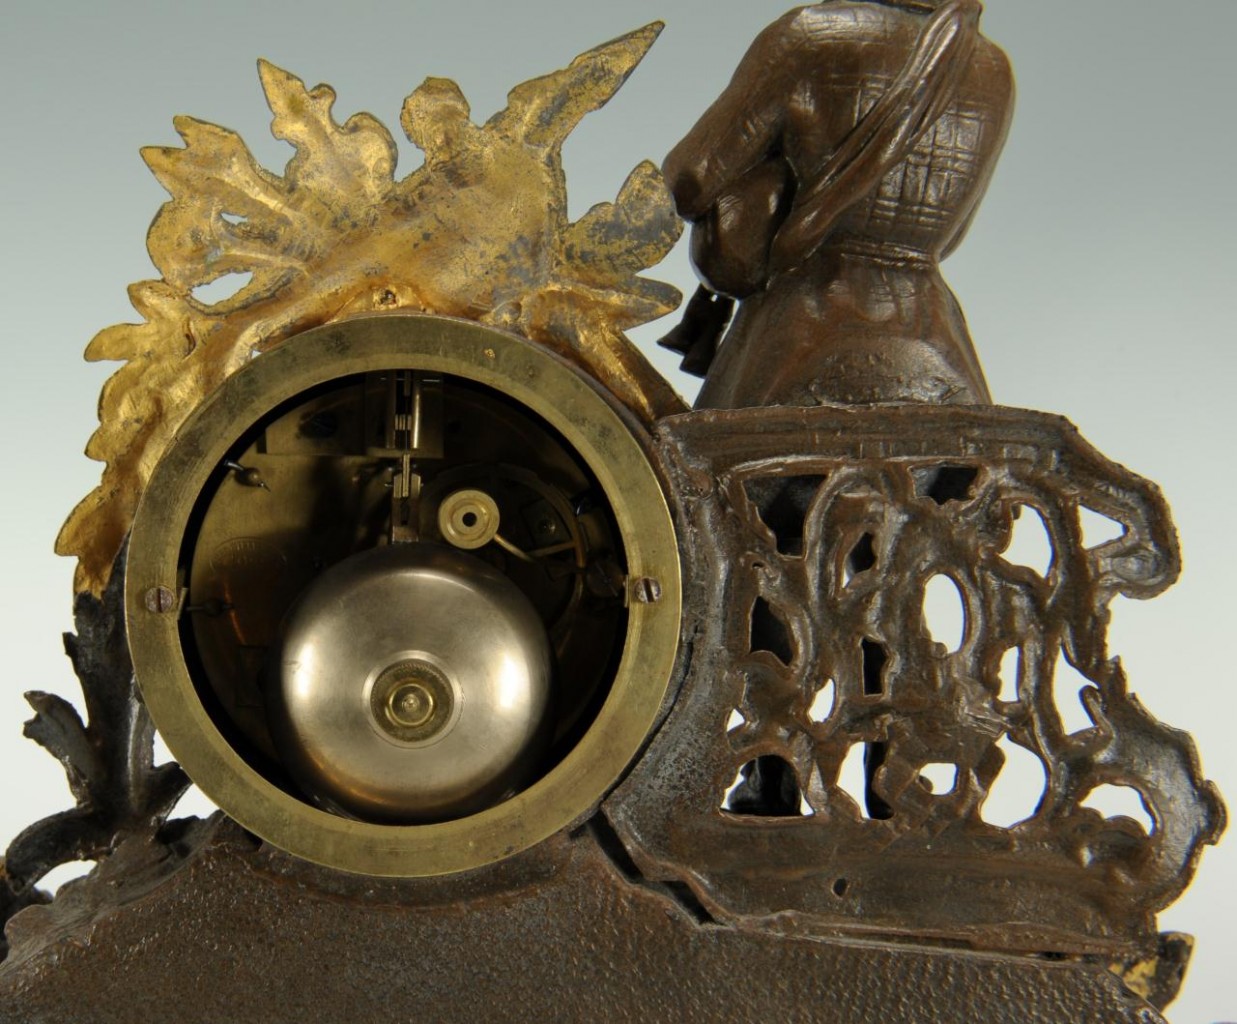 Lot 311: French Figural Bagpiper Clock under Dome